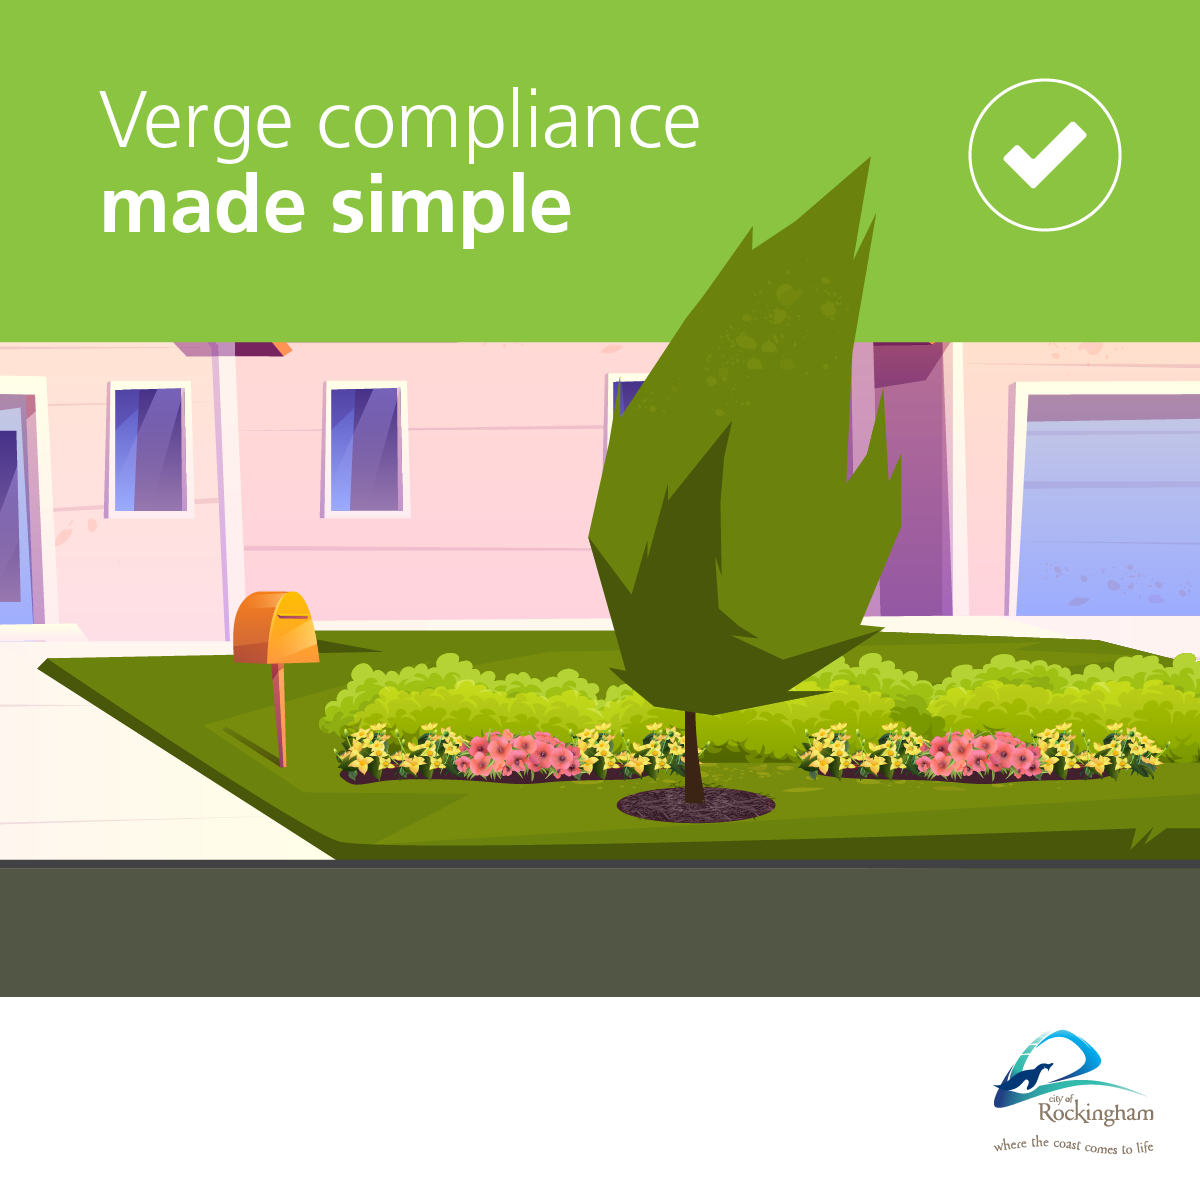 Verge compliance made simple image